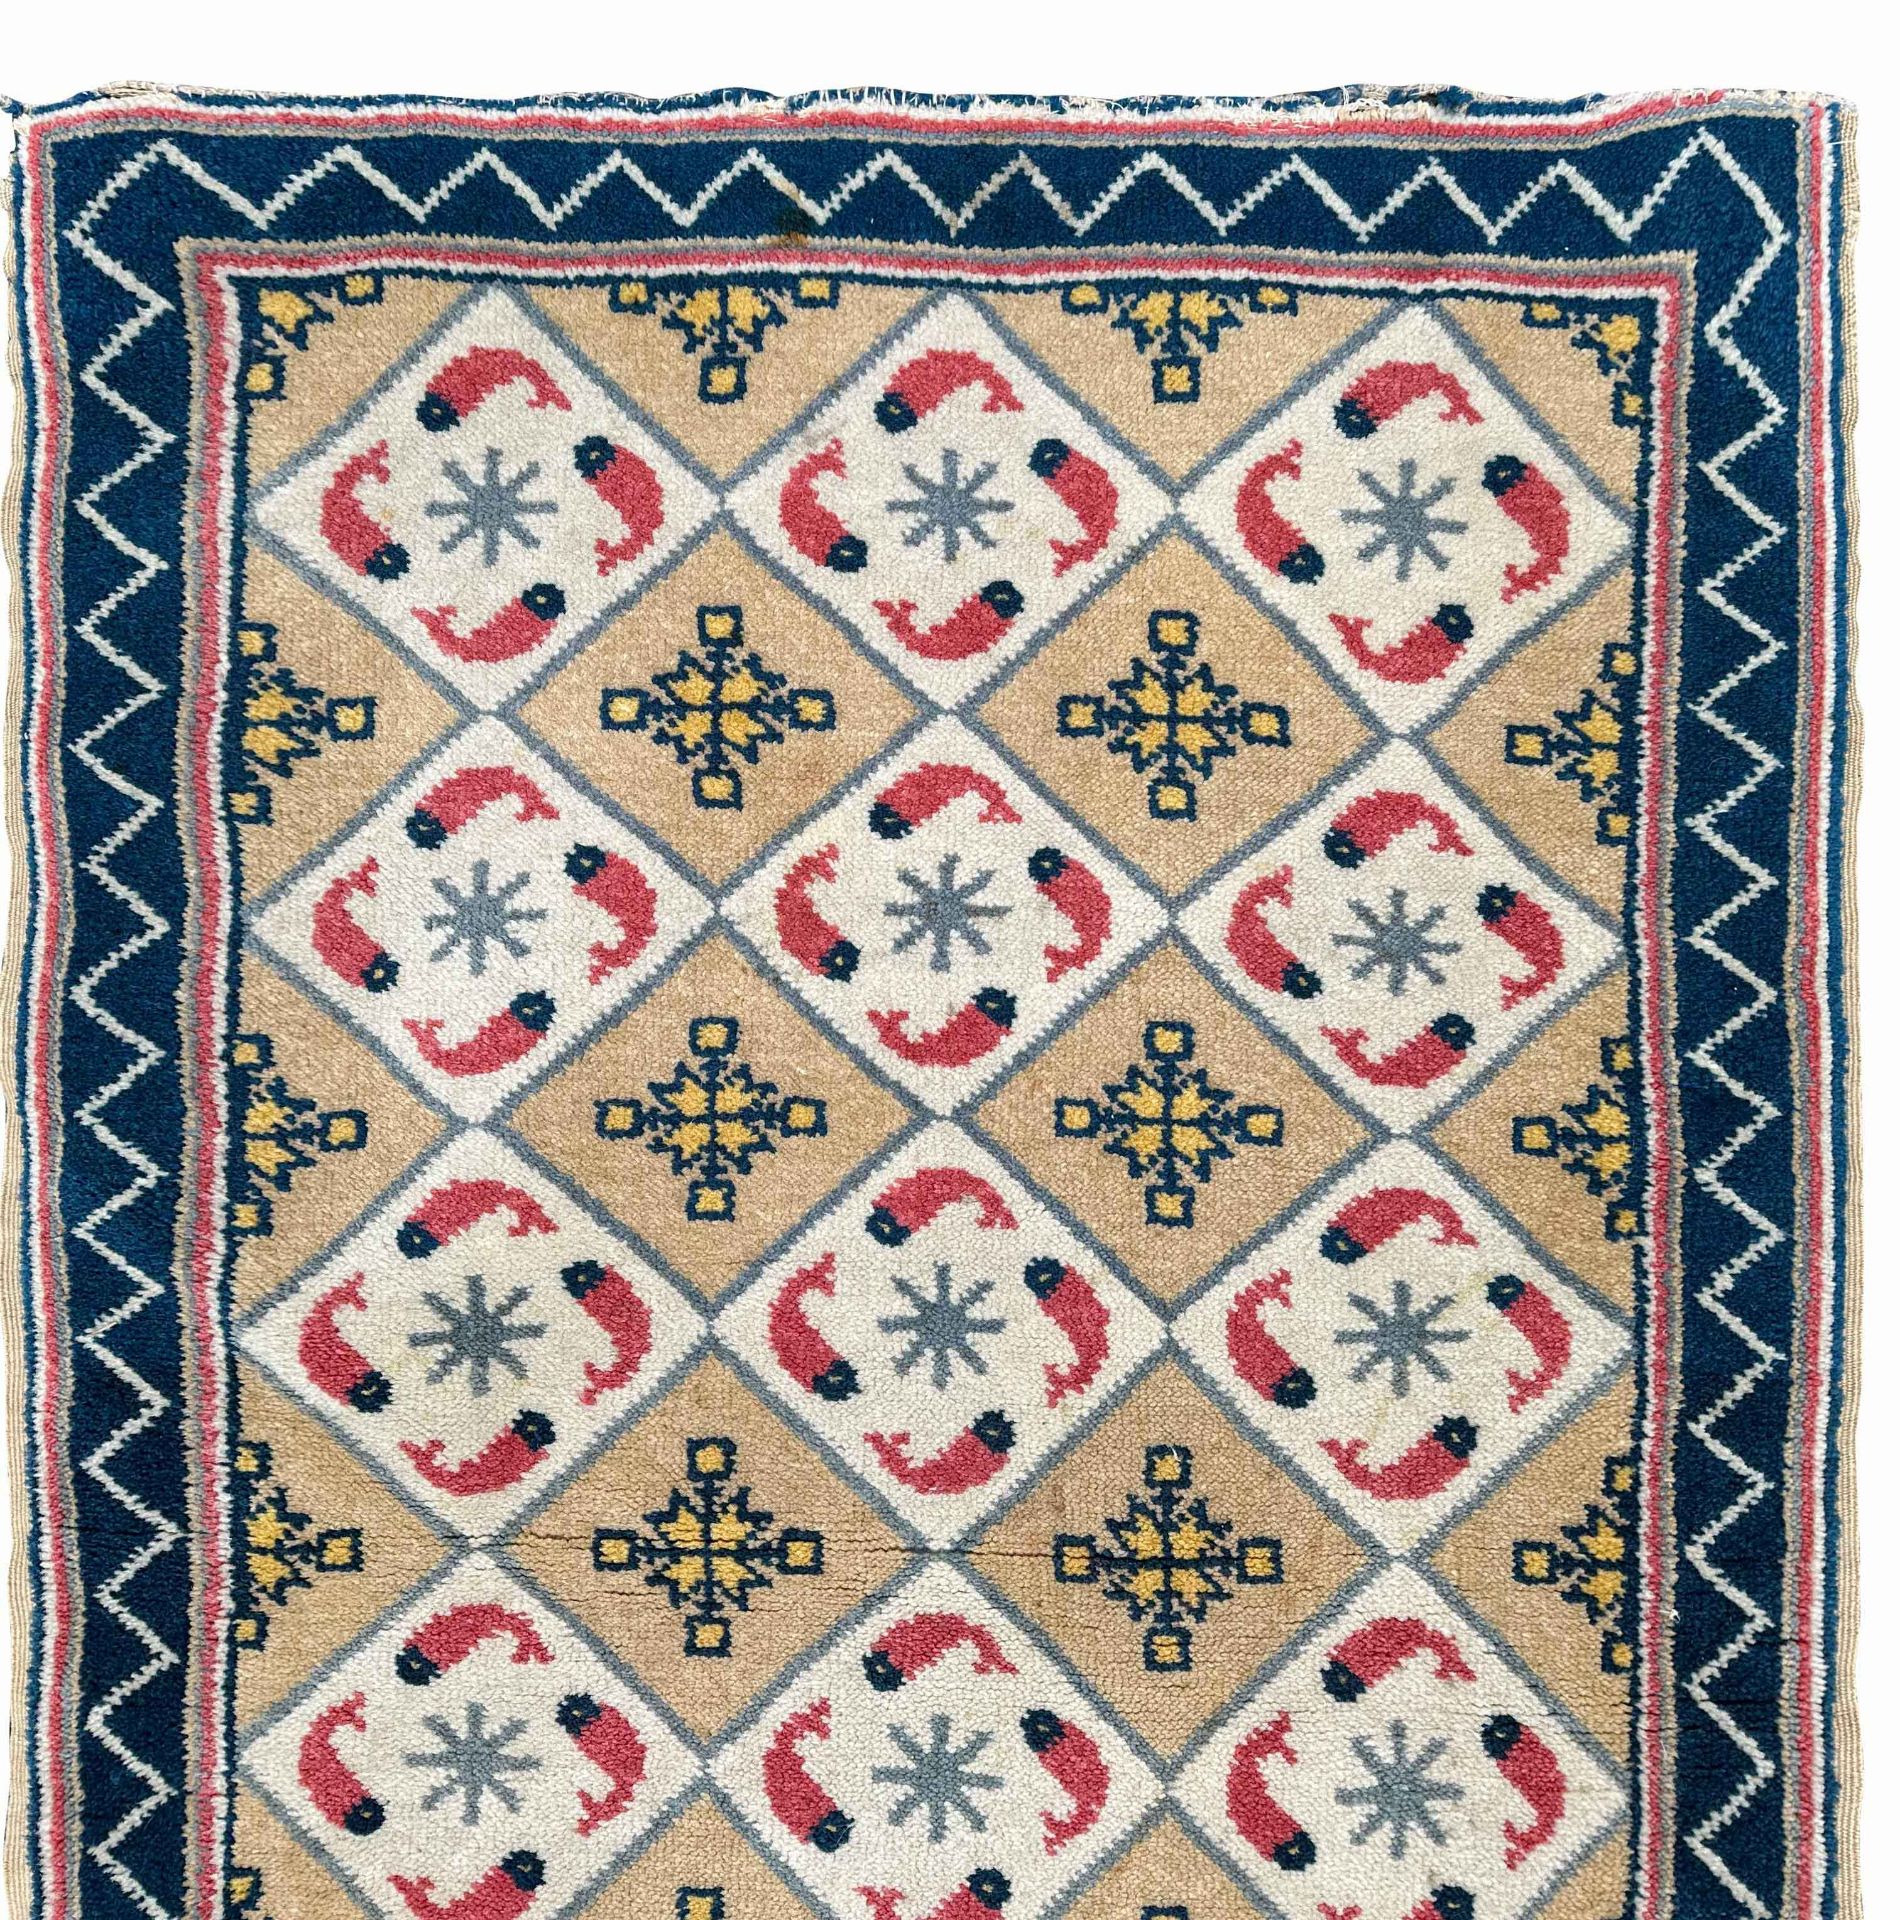 Fish country carpet. Pomerania. East Prussia. 1st half of the 20th century. - Image 2 of 5